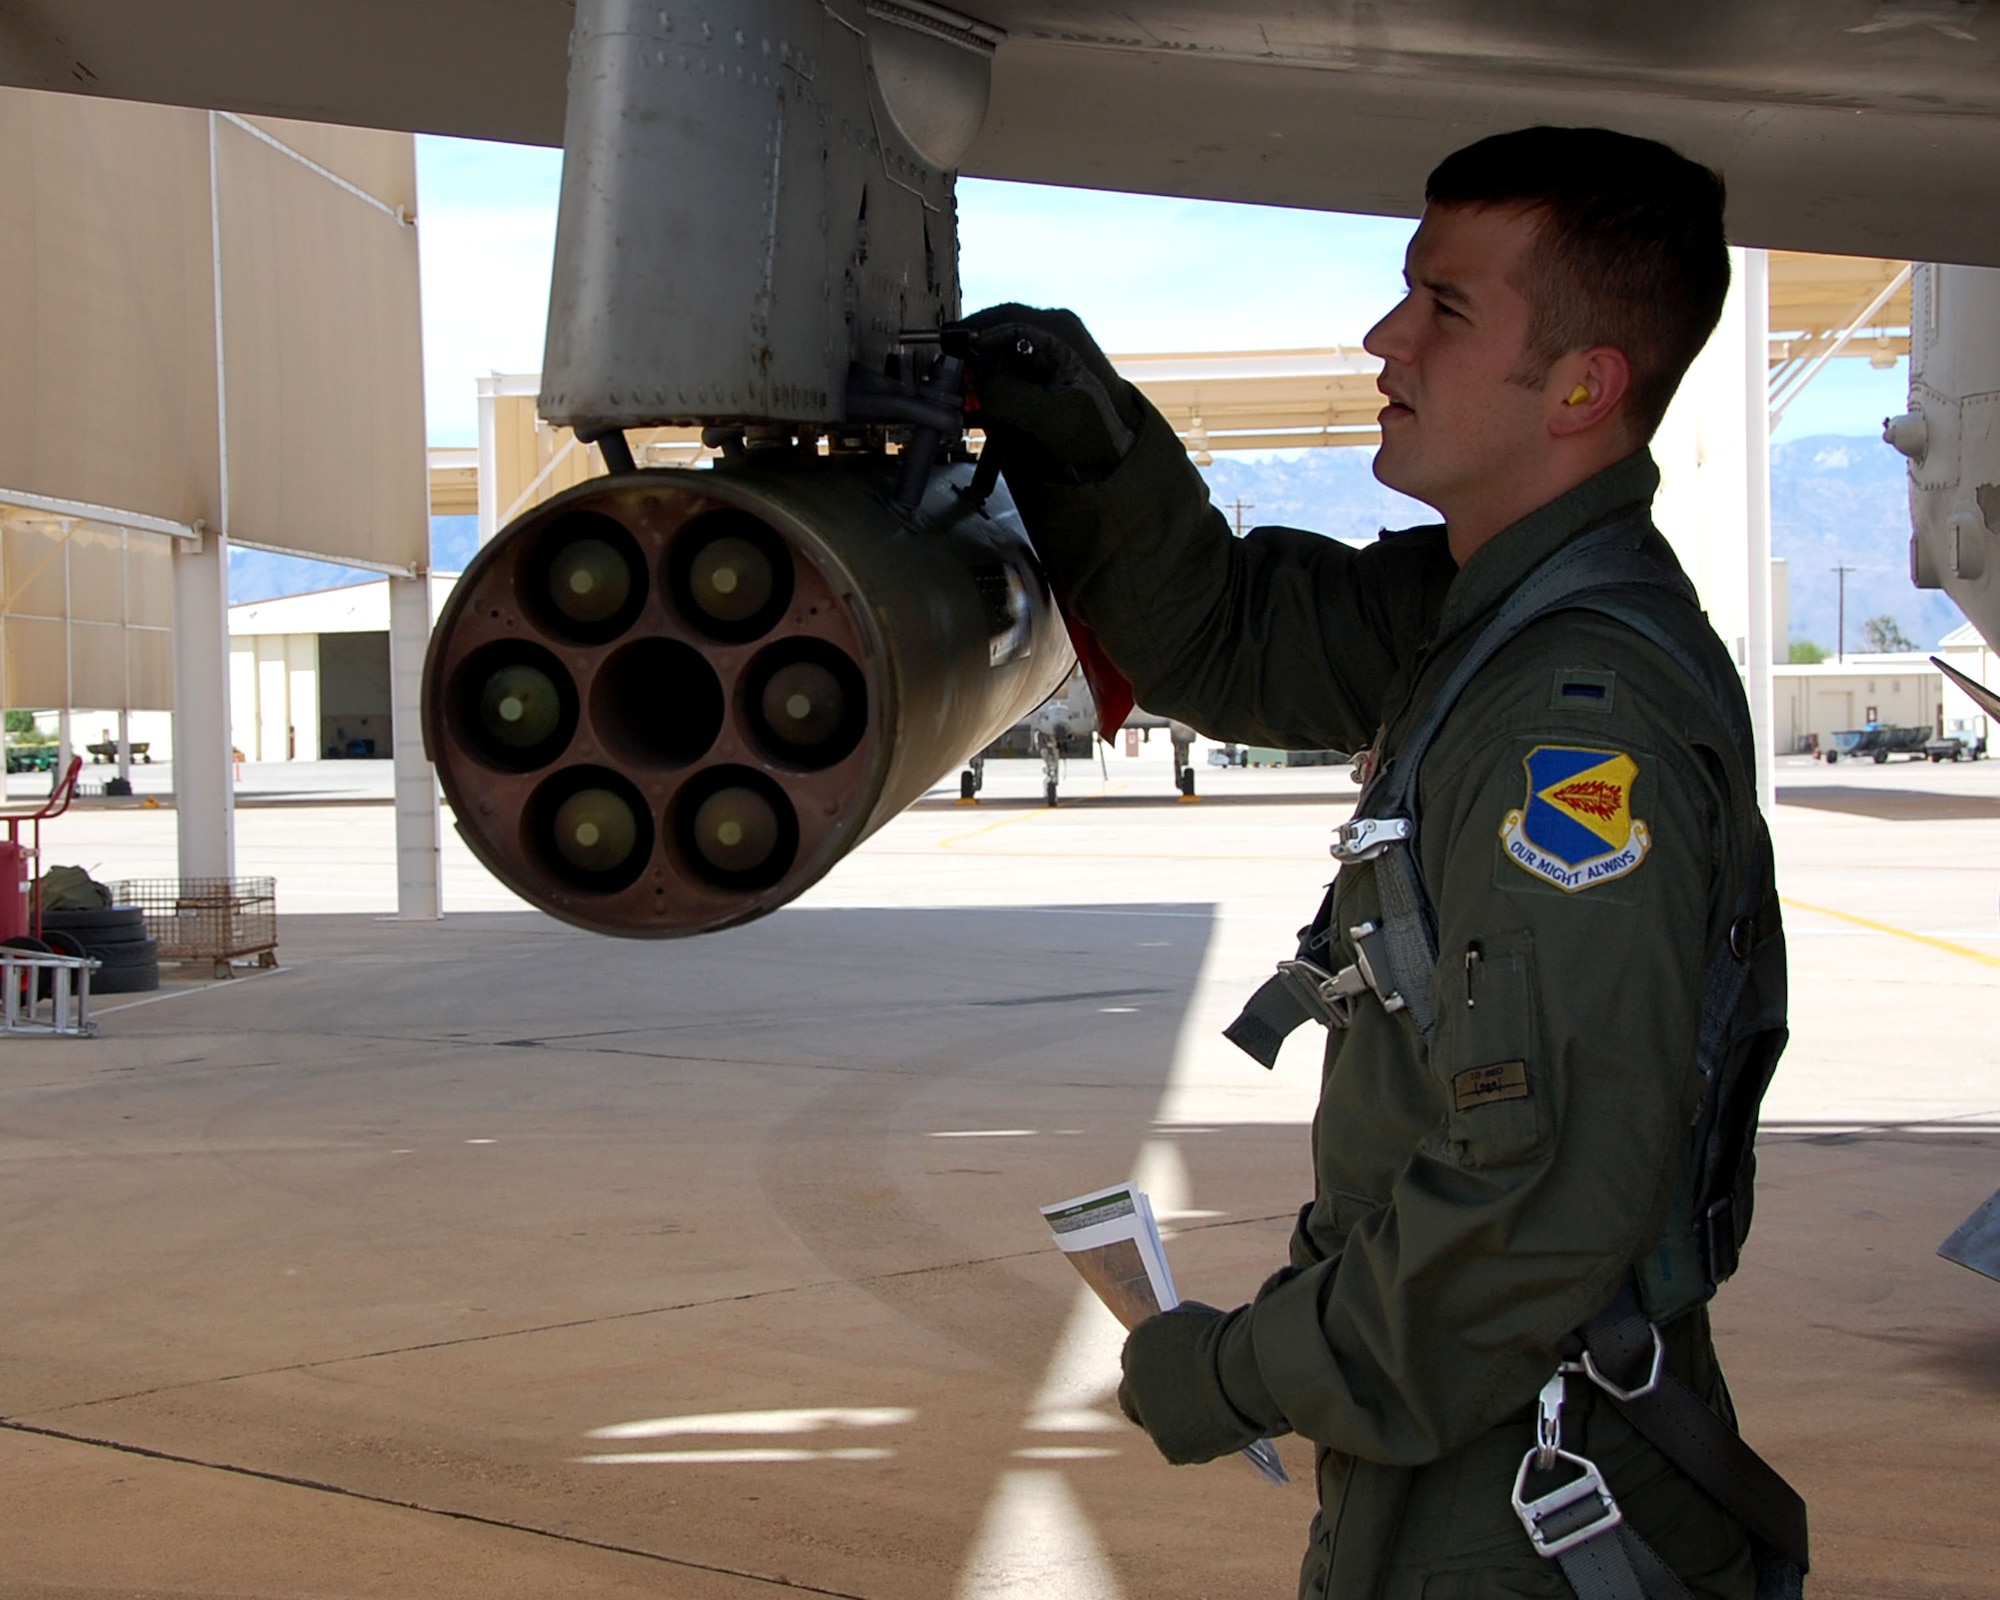 1st Lt. Dan Griffin, a pilot from the 358th Fighter Squadron, checks the safety pin and the ripple settings for a pod of white phosphorus “Willie Pete” rockets as part of his pre-flight weapons inspection, here June 8. Lieutenant Griffin is a student in the A-10C Pilot Initial Qualification course and upon completion of this course he will be a fully qualified A-10C pilot. To learn more about his journey through the course, check out “Behind the Scenes: The Making of an A-10C Pilot” at www.dm.af.mil. (U.S. Air Force photo/Capt. Stacie N. Shafran)